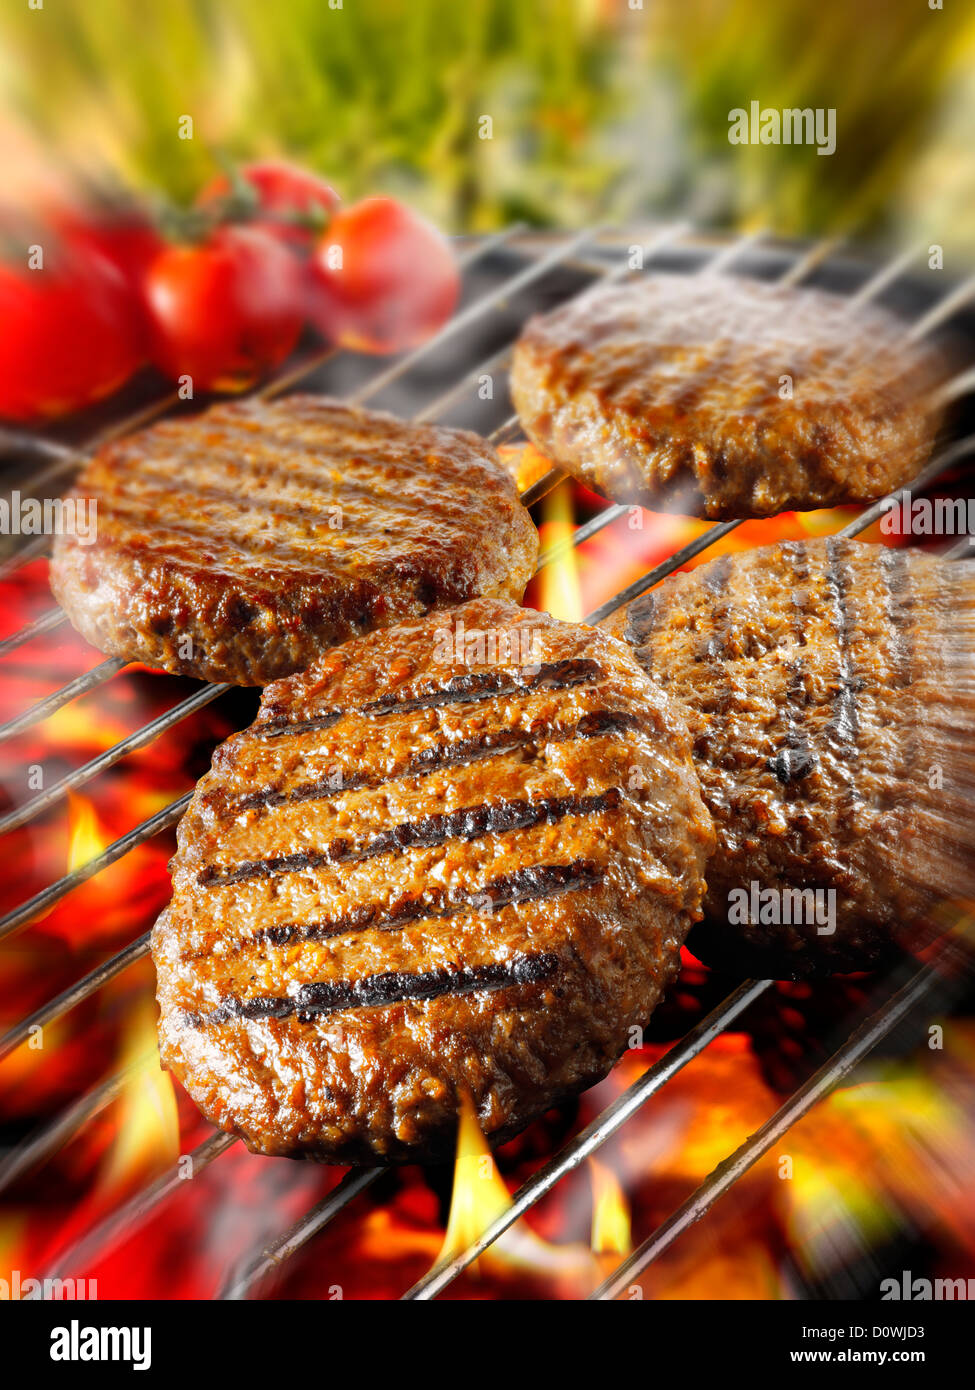 Barbecue burgers on a BBQ grill Stock Photo